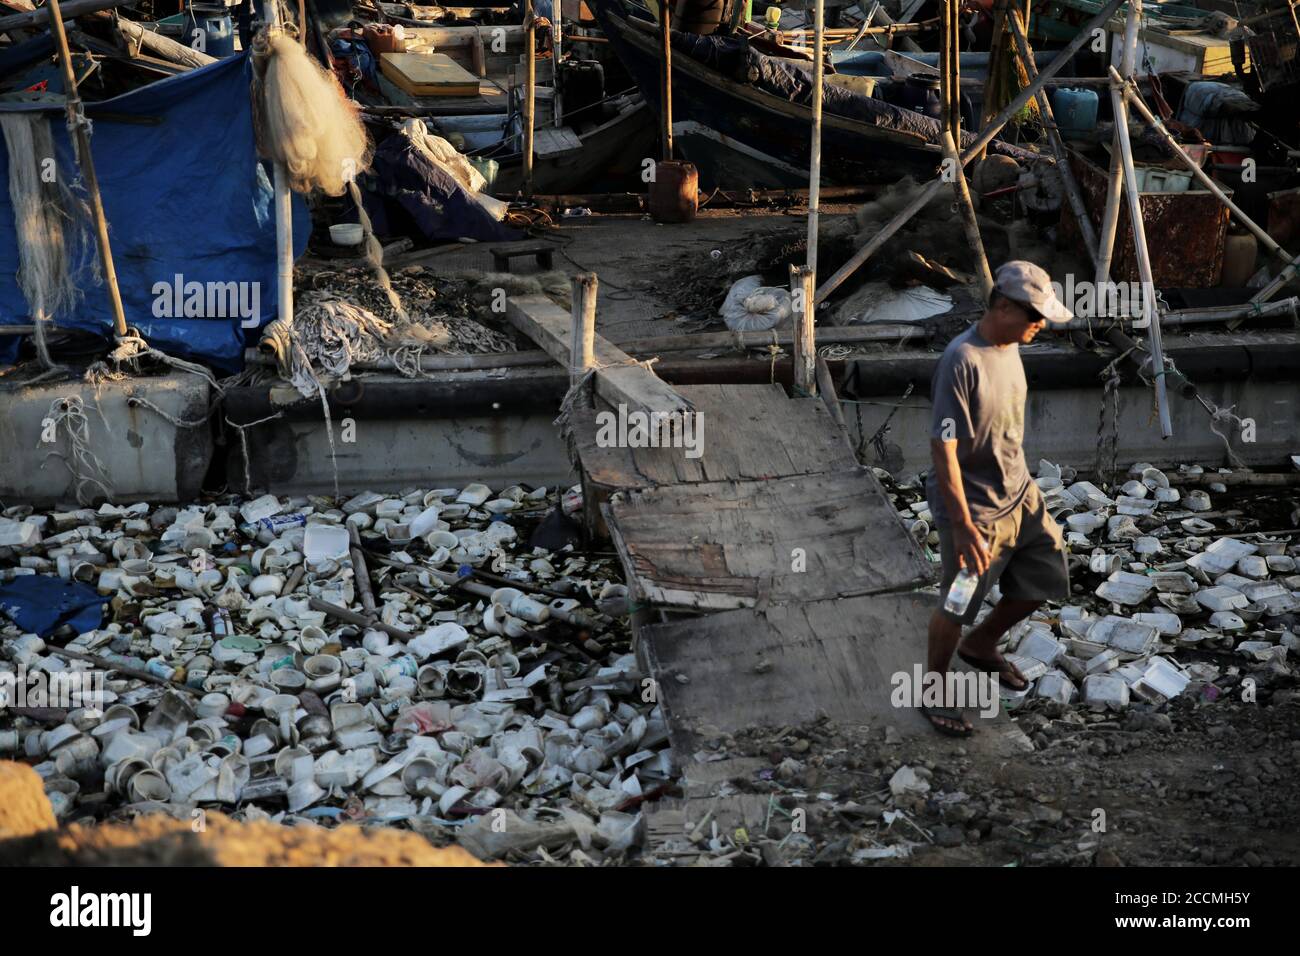 Jakarta, DKI Jakarta, Indonesia. 22nd Aug, 2020. A man walks trough a pile of garbage.Plastic waste that has accumulated around the coast endangers marine life and local residents. Credit: Aslam Iqbal/SOPA Images/ZUMA Wire/Alamy Live News Stock Photo